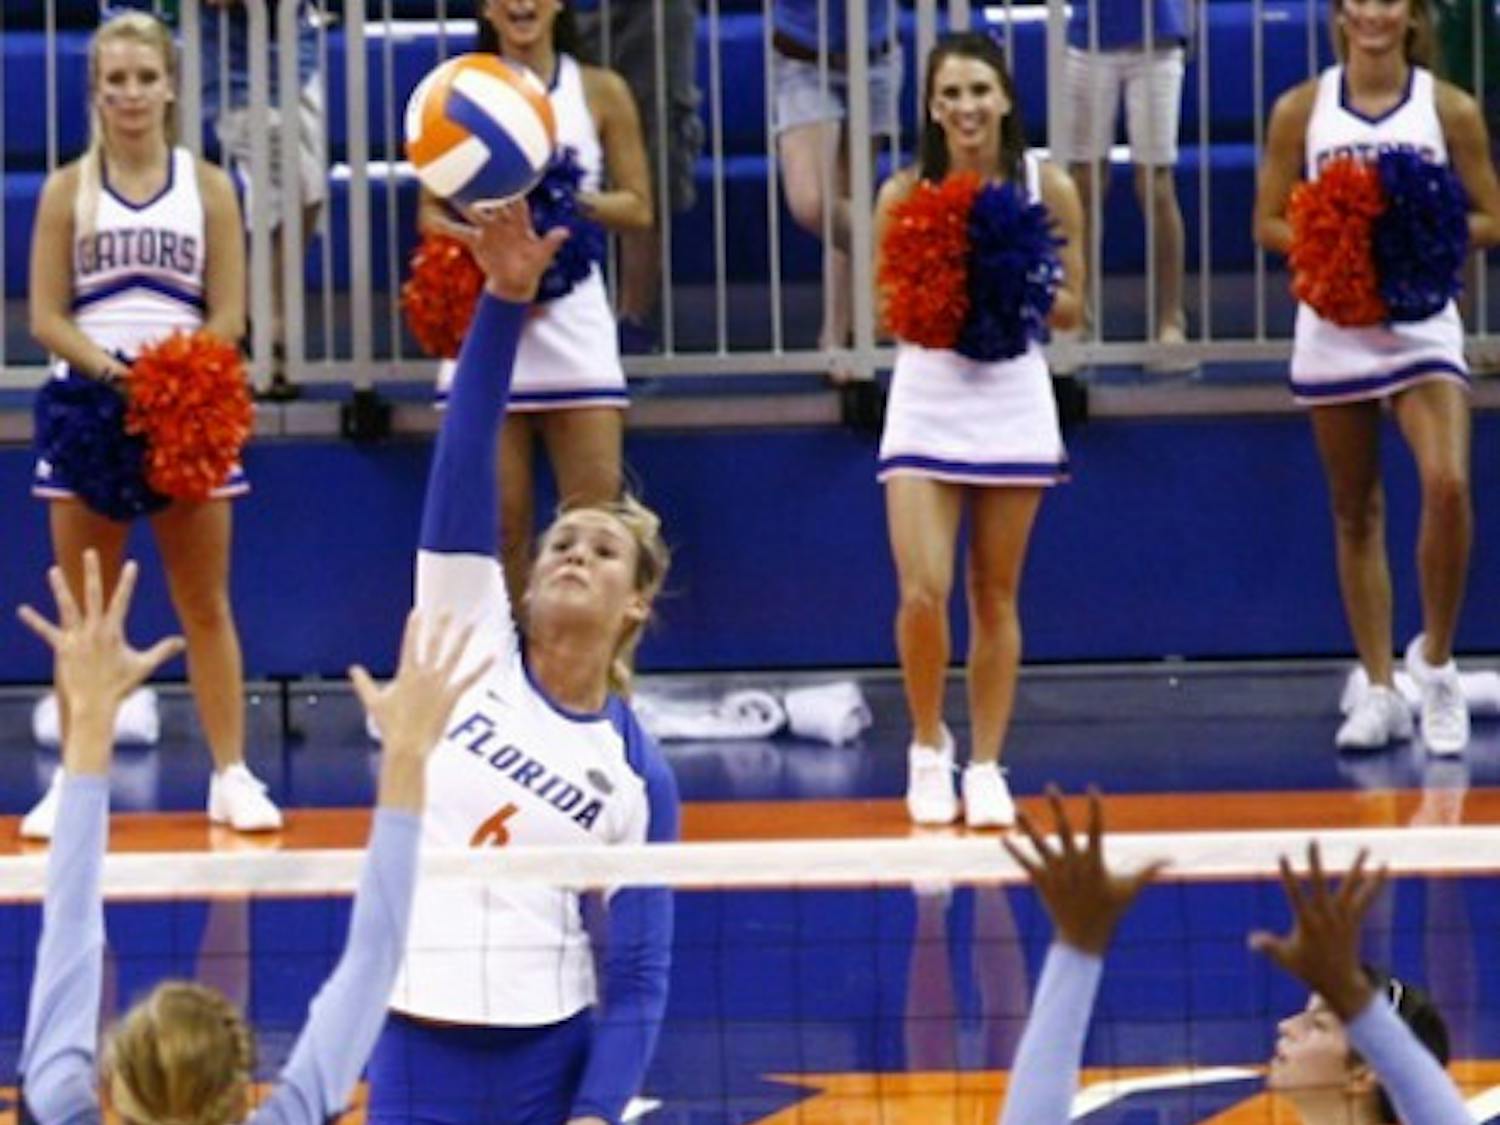 UF outside hitter Kristy Jaeckel has become a more complete player in her senior season. She had 30 digs and 24 kills in two games last weekend.